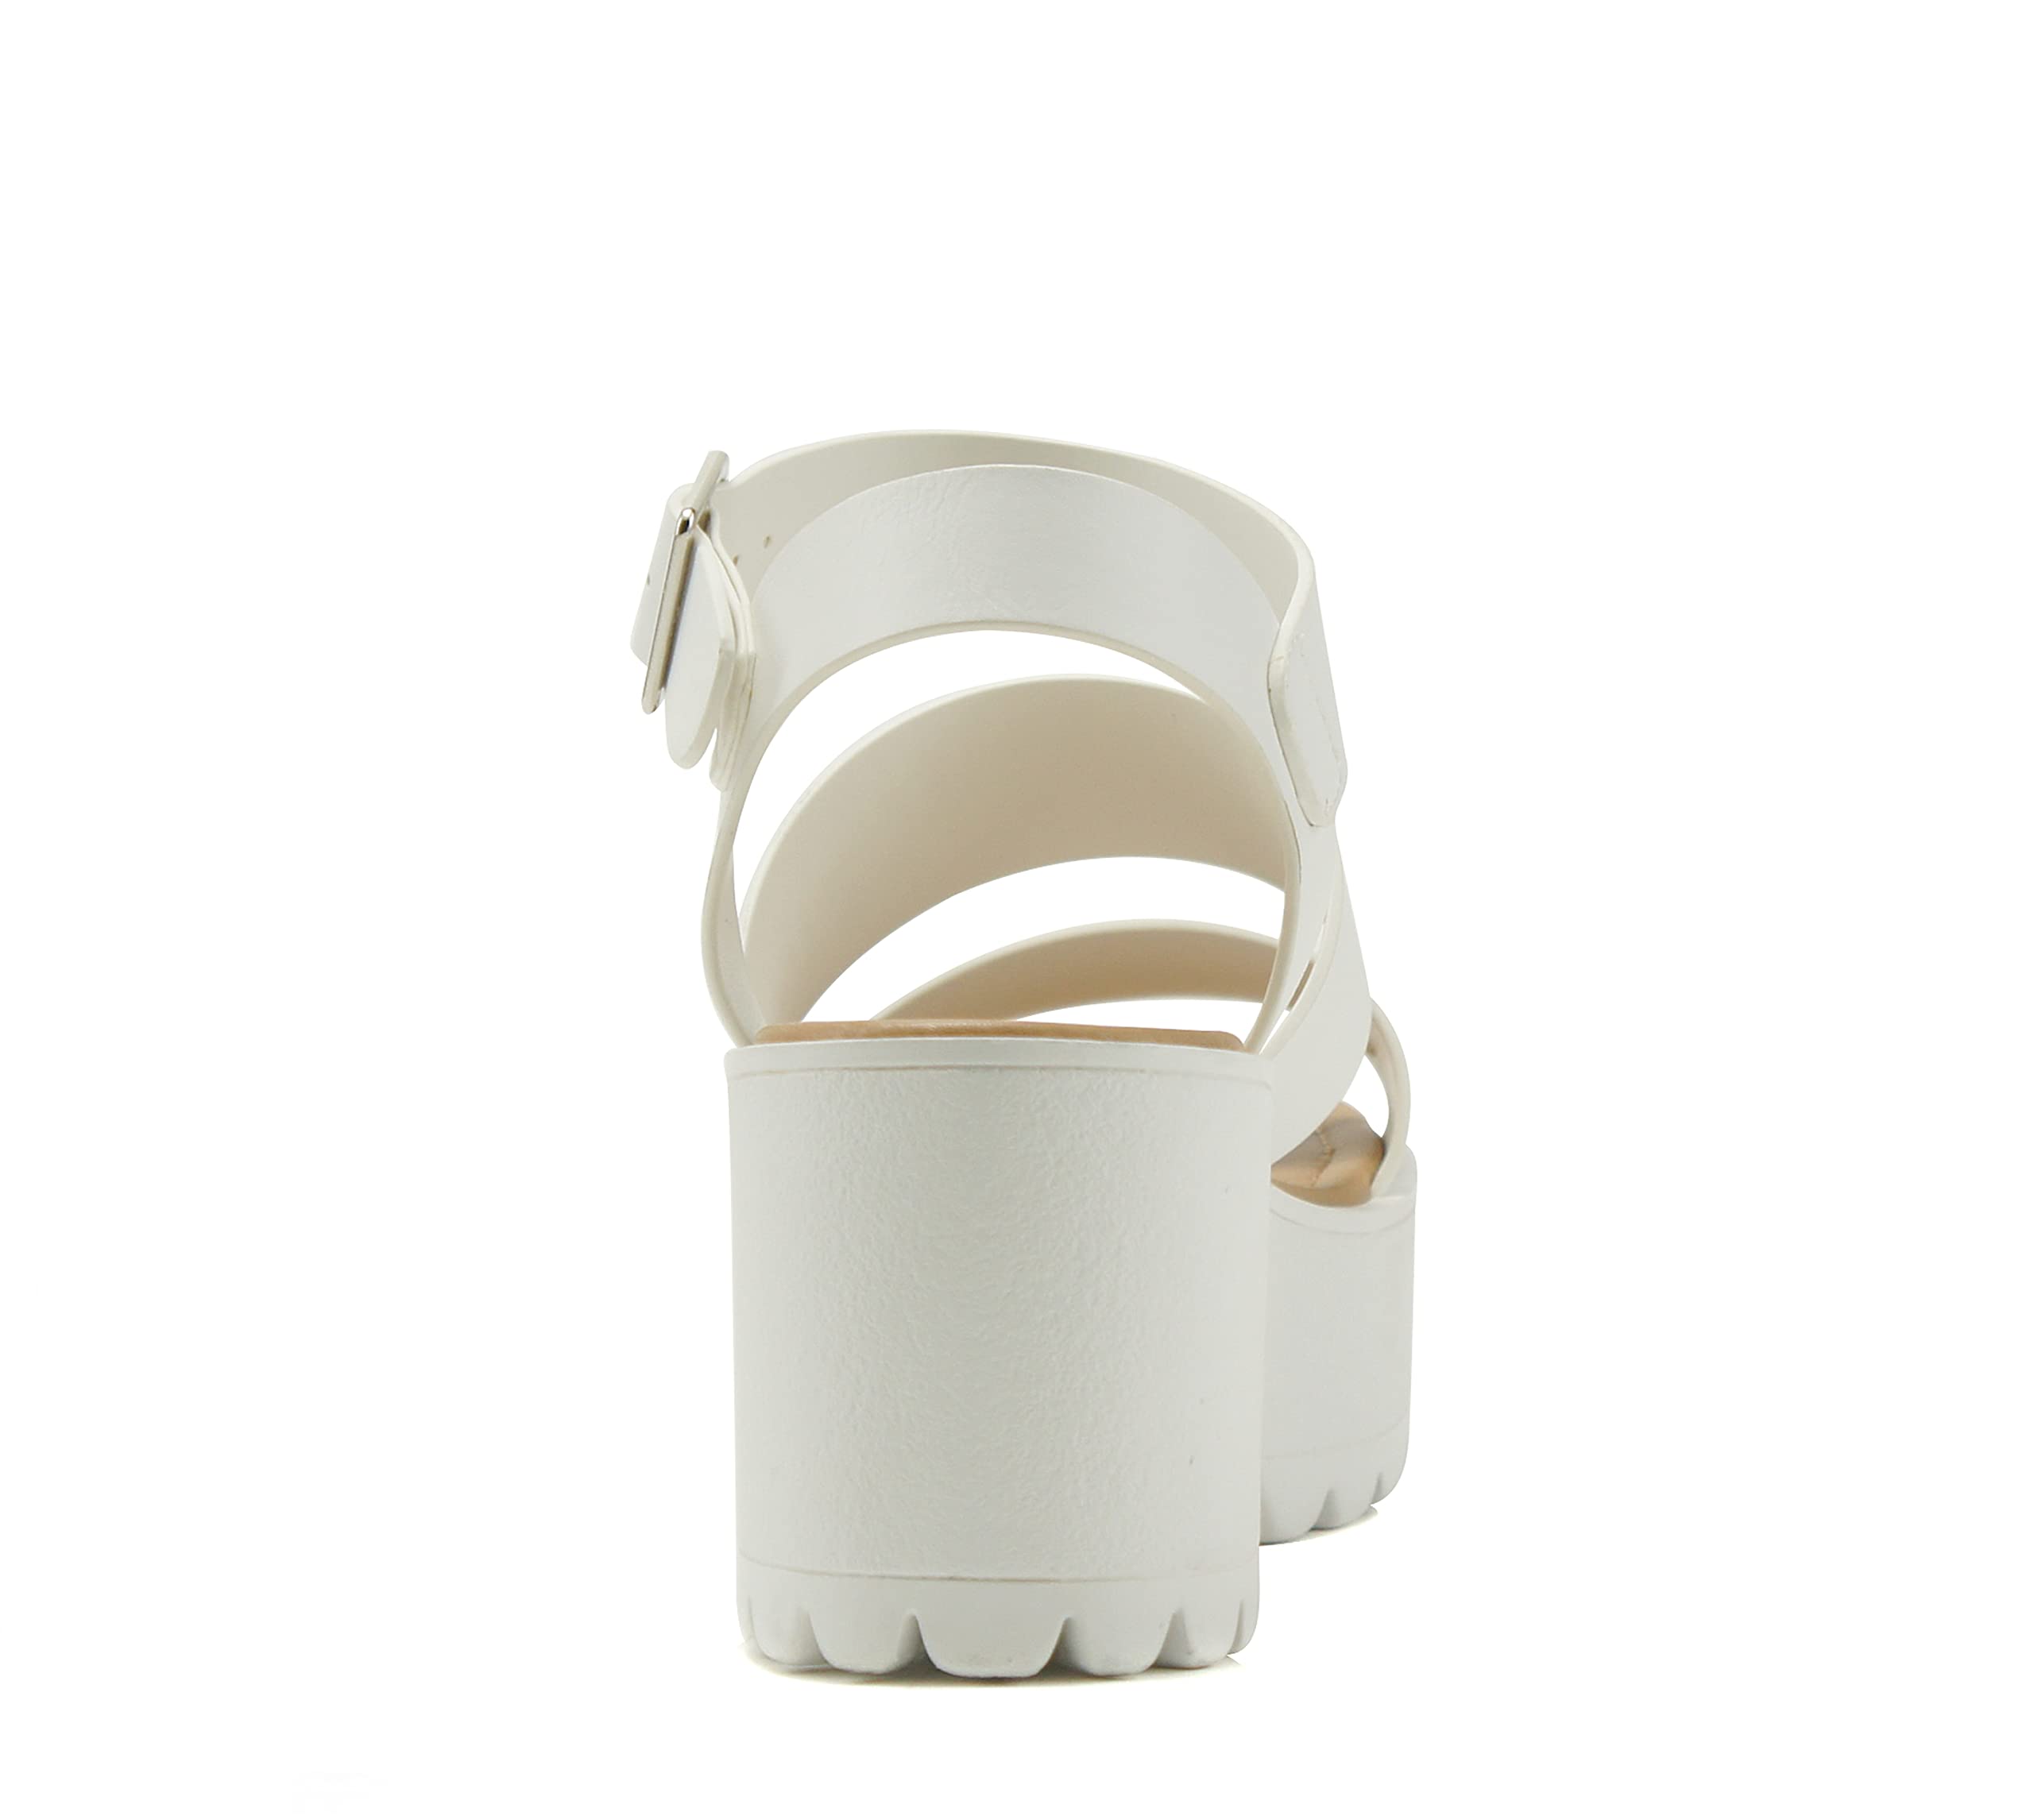 Soda ACCOUNT ~ Women Open Toe Two Bands Lug sole Fashion Block Heel Sandals with Adjustable Ankle Strap